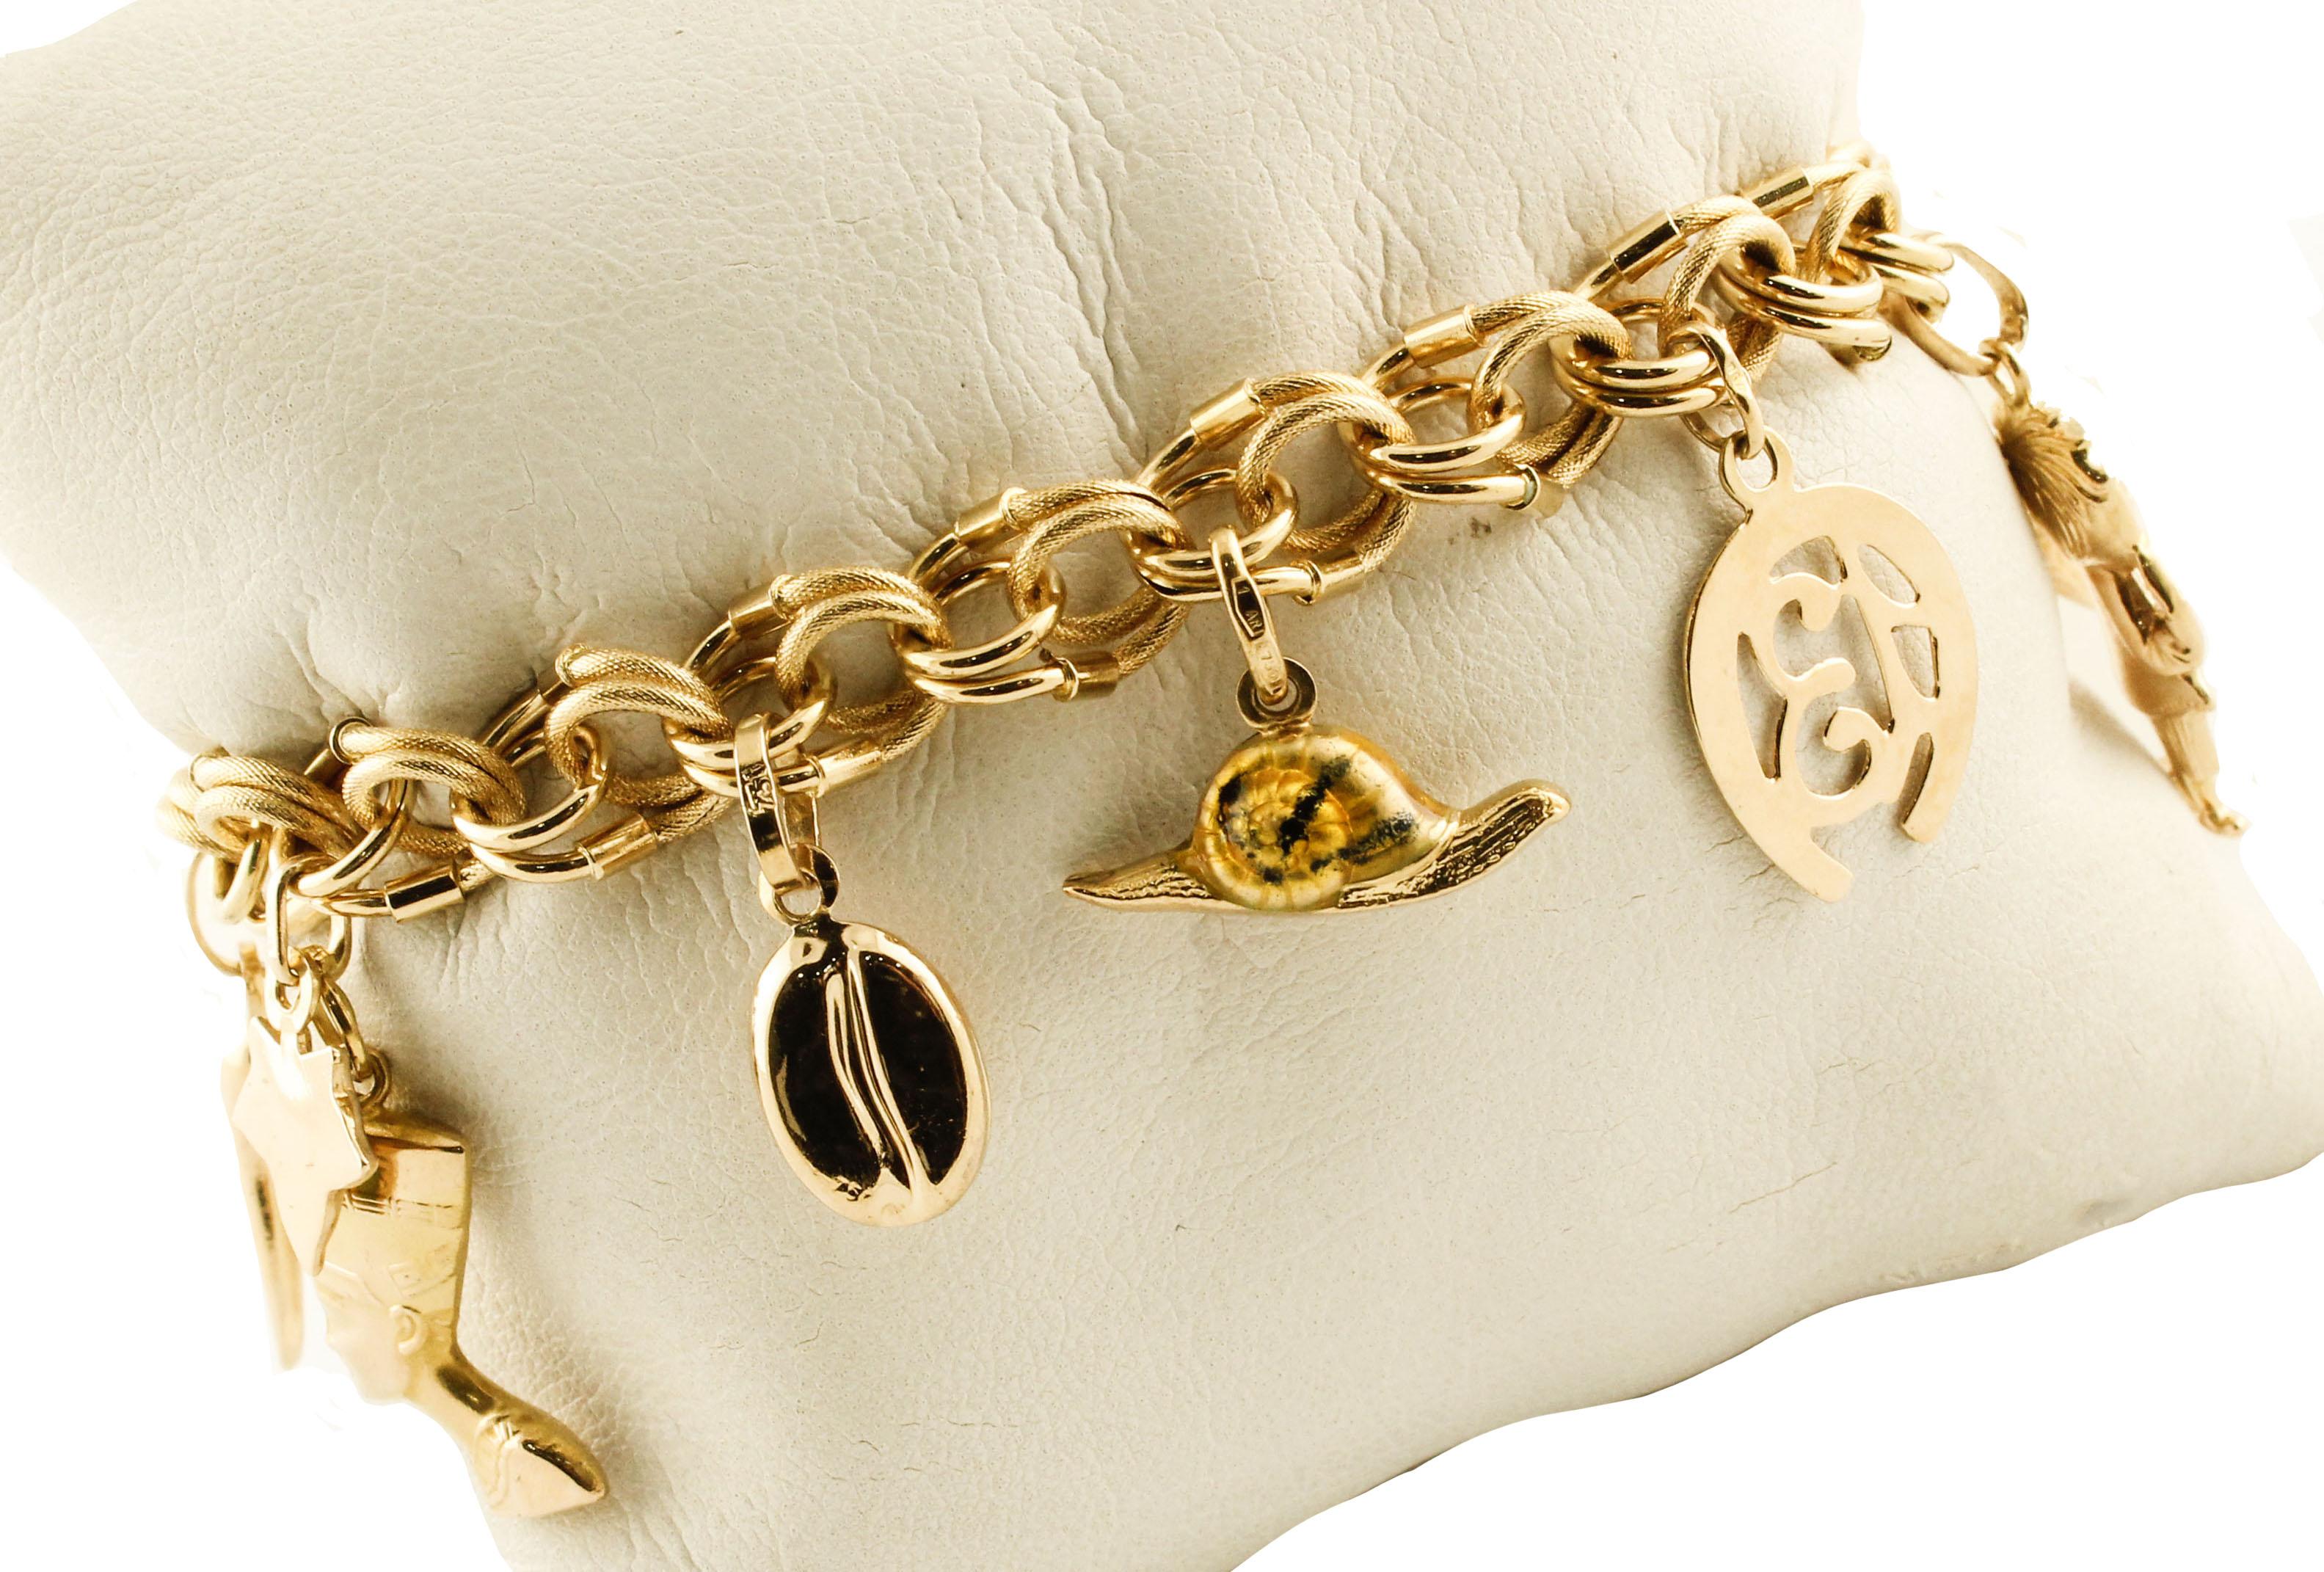 Gorgeous 18K yellow gold bracelet composed of different charms, that rapresent cross, heart, anchor, acorn, fish, child, good luck horseshoe, snail, coffee bean, leaves, egyptian, horn good luck amulet.
This is a good luck bracelet
Total Weight